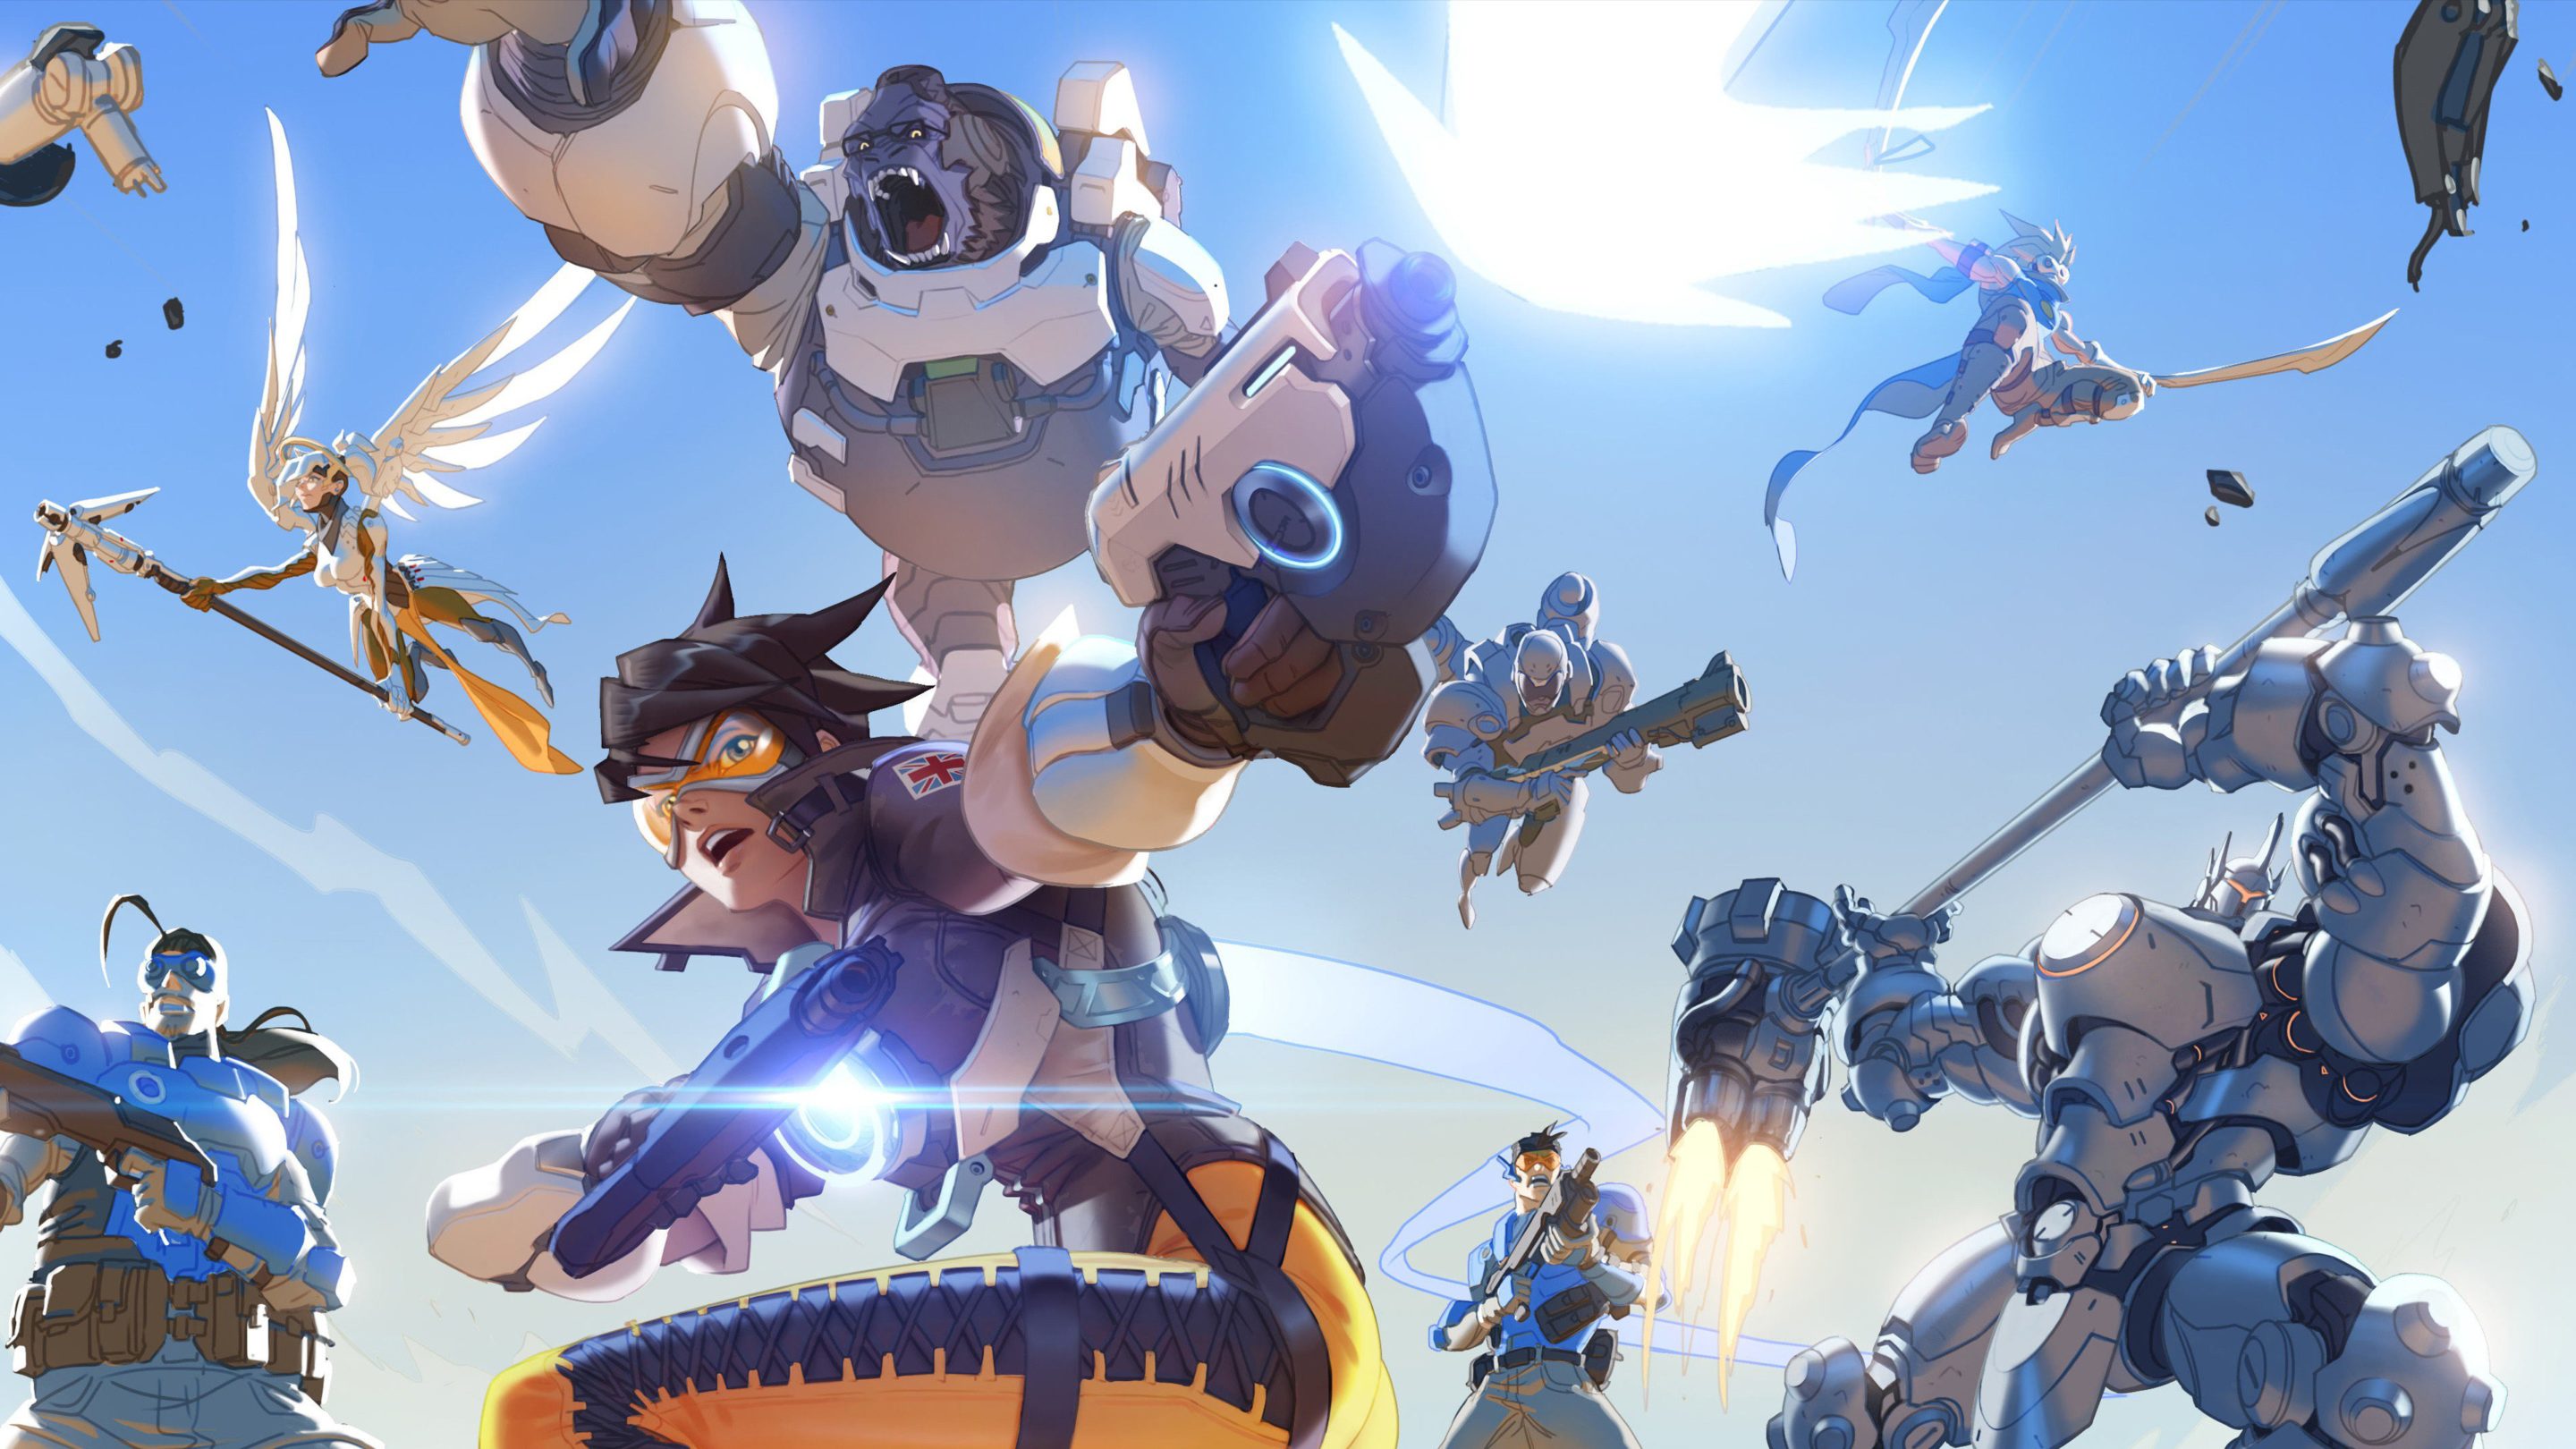 Blizzard Exec Mike Morhaime Has Big Hopes for Overwatch League